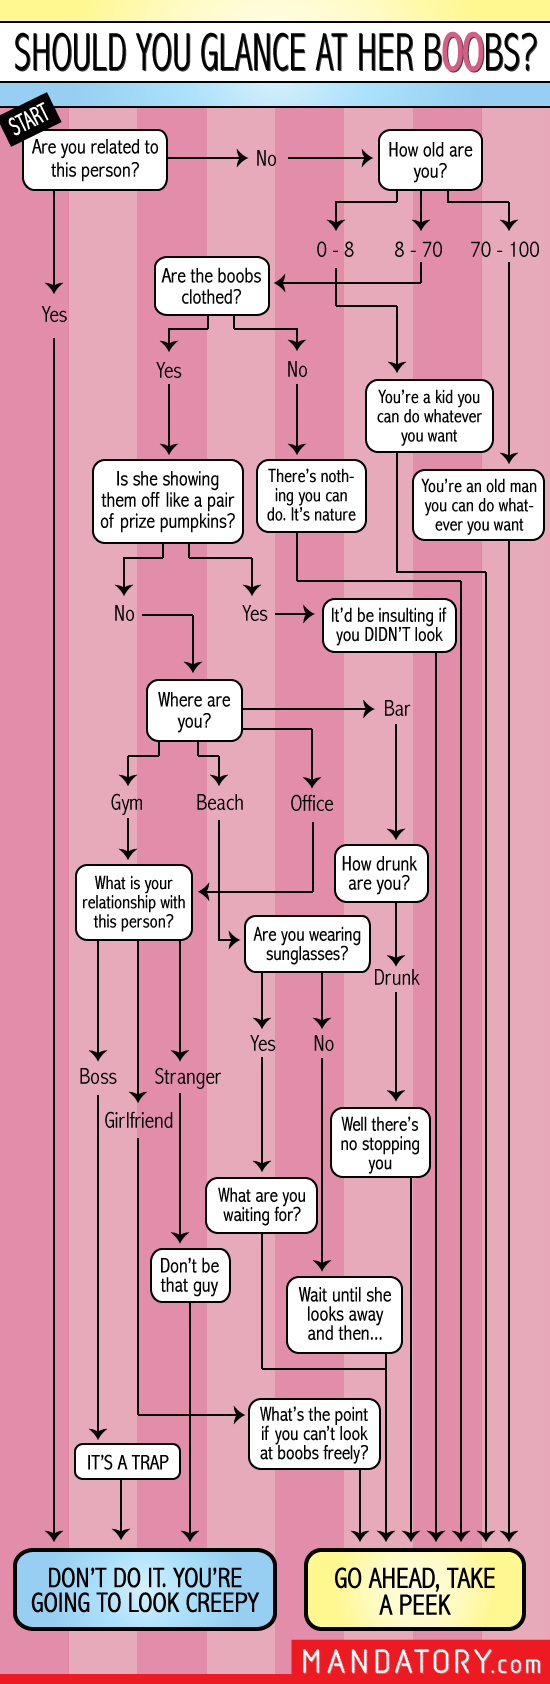 Should you glance at her boobs Flowchart